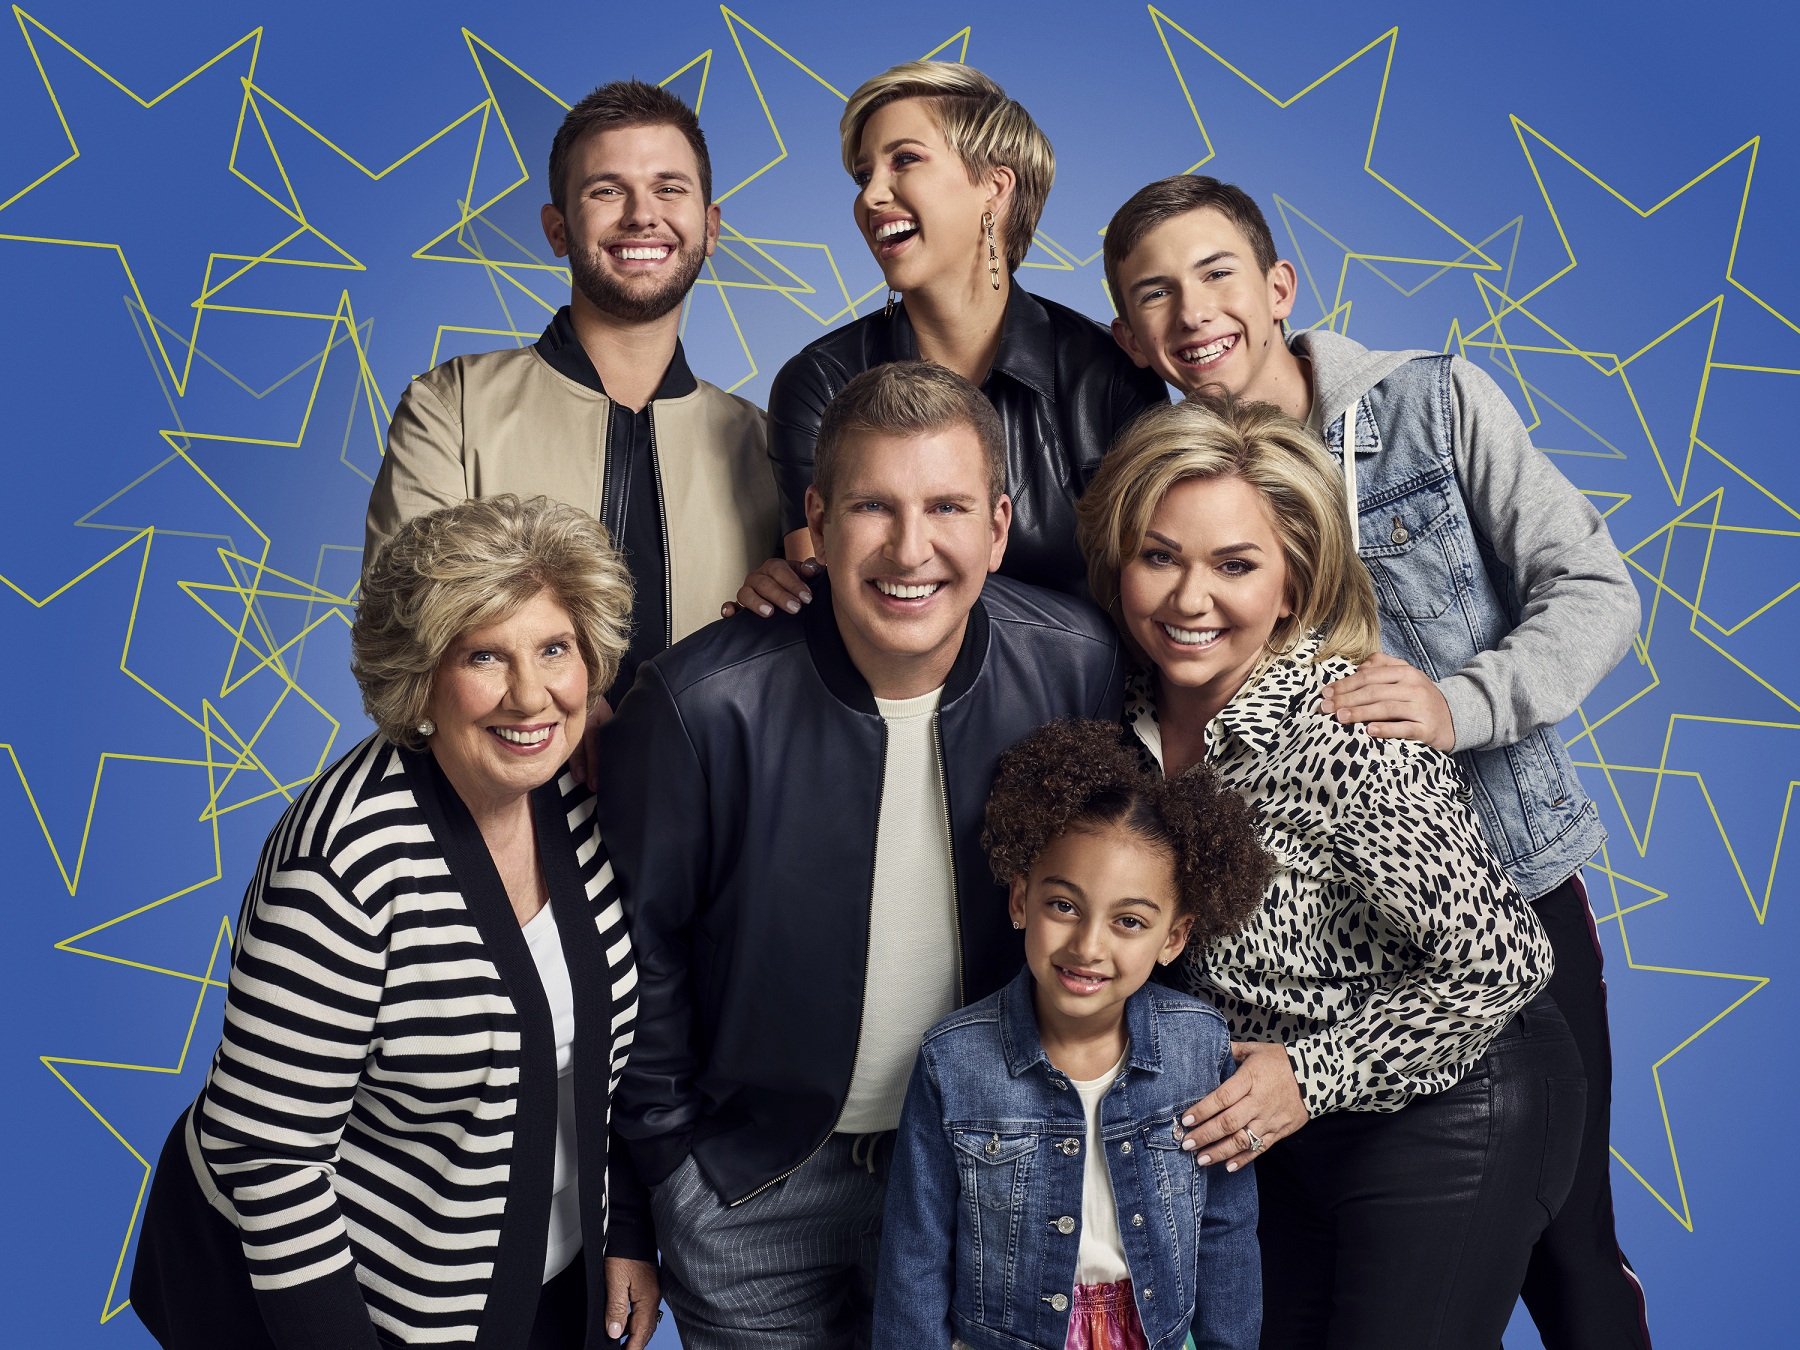 Faye Chrisley, Chase Chrisley, Todd Chrisley, Savannah Chrisley, Chloe Chrisley, Julie Chrisley, and Grayson Chrisley pictured on Season 8 of "Chrisley Knows Best." | Source: Getty Images.